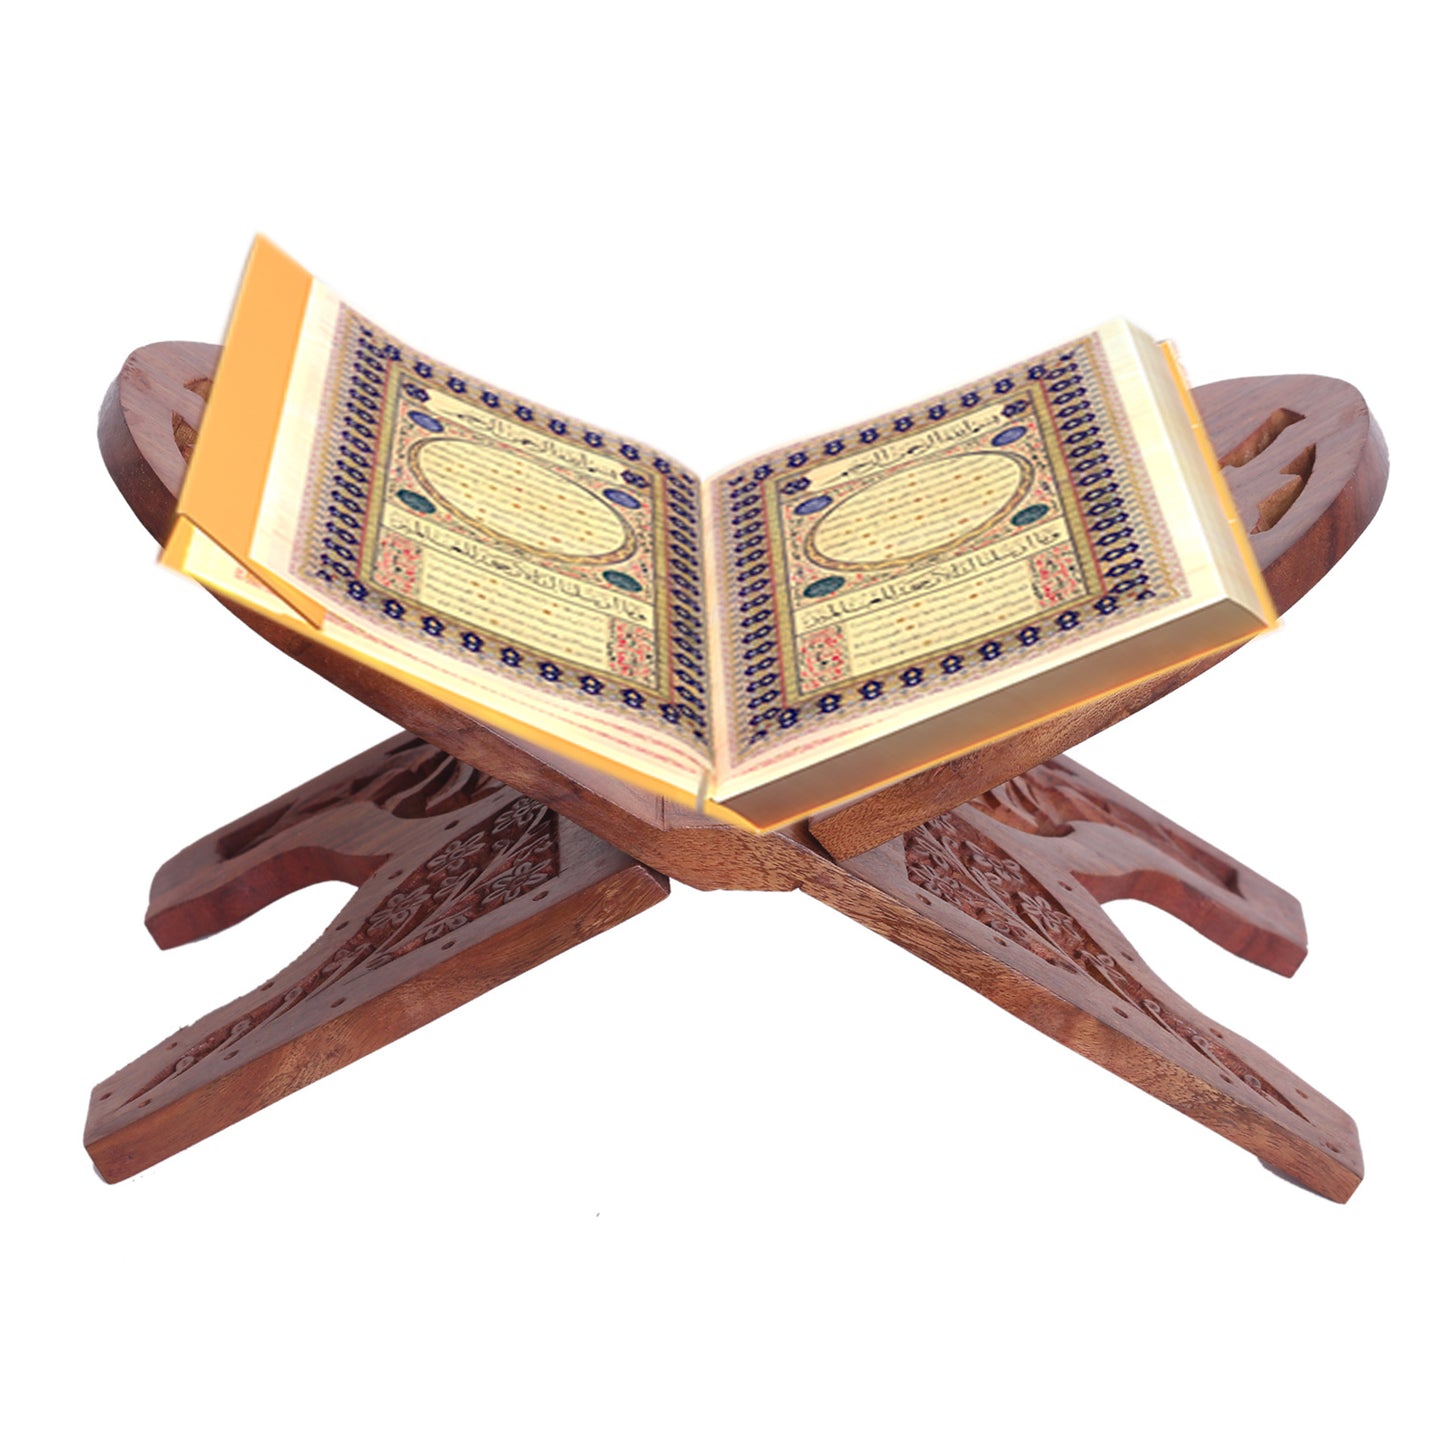 WILLART Large Beautiful Wooden Floral Carved Holy Gita Quran Bible Book Holder Free Reading Book Support Folding Religious Prayer Display Stand